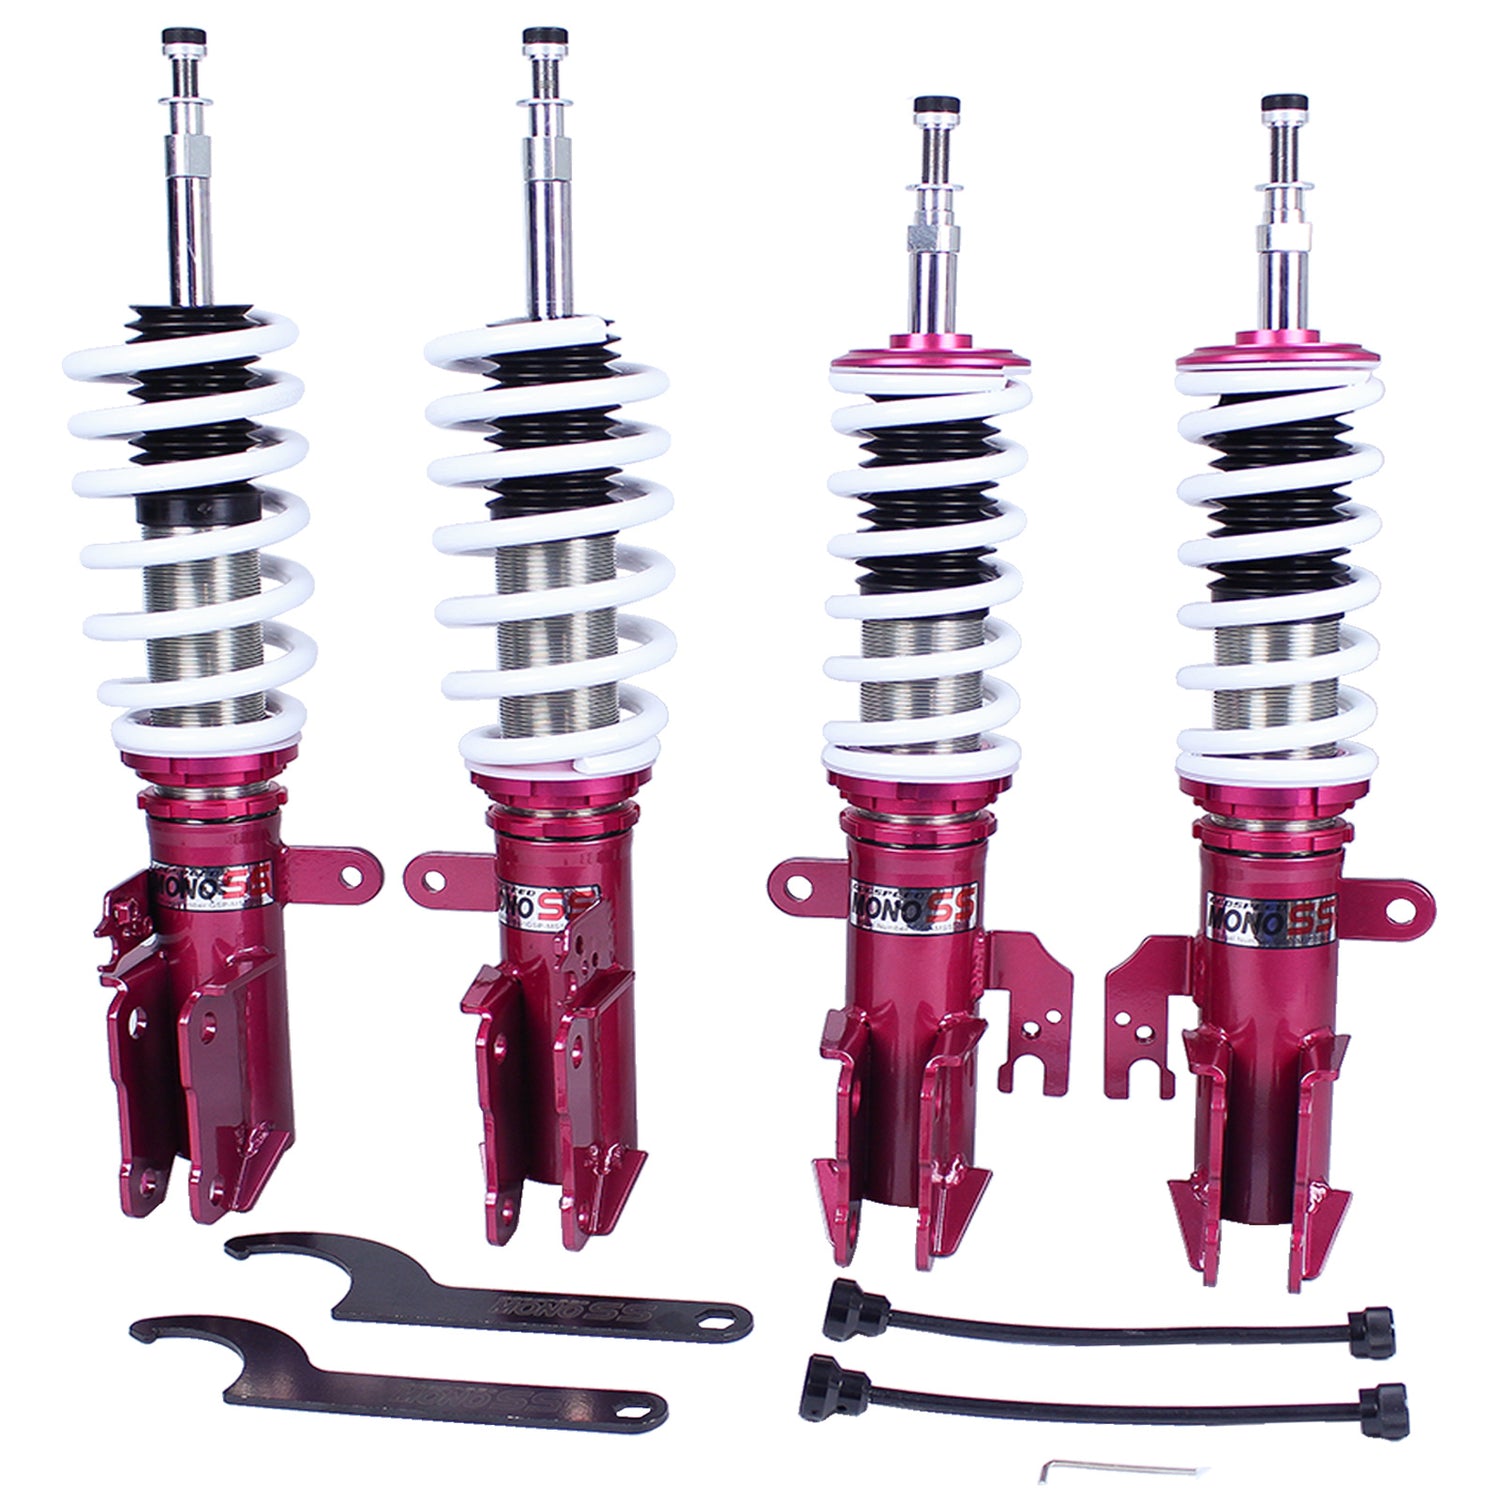 Godspeed MSS0650-C MonoSS Coilover Lowering Kit, Fully Adjustable, Ride Height, Spring Tension And 16 Click Damping, Toyota Solara(ACV30/MCV30) 2004-08